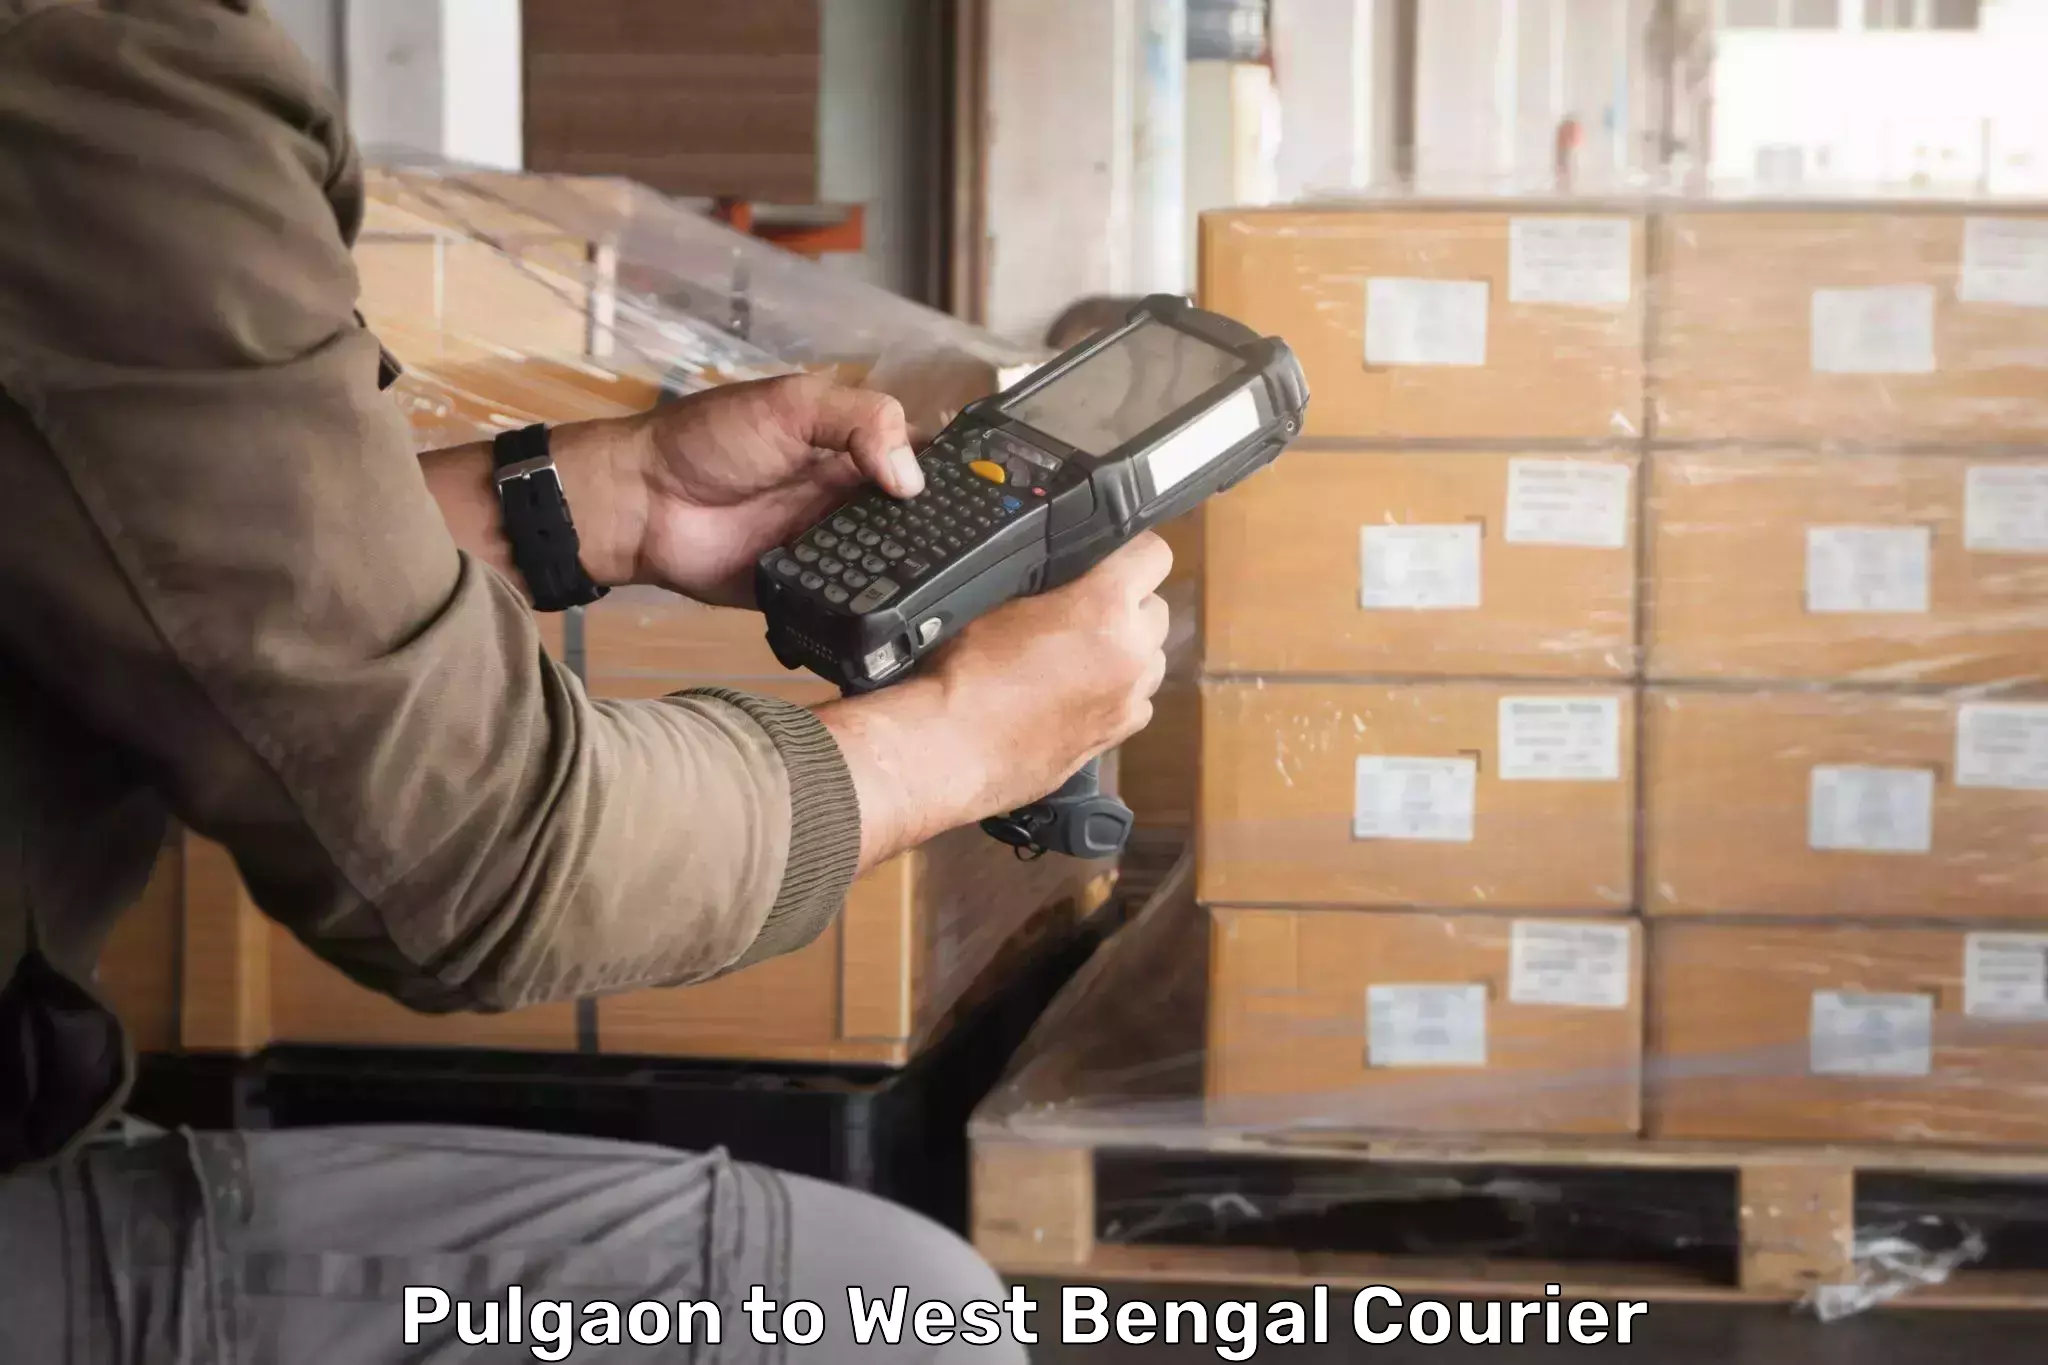 User-friendly delivery service Pulgaon to West Bengal